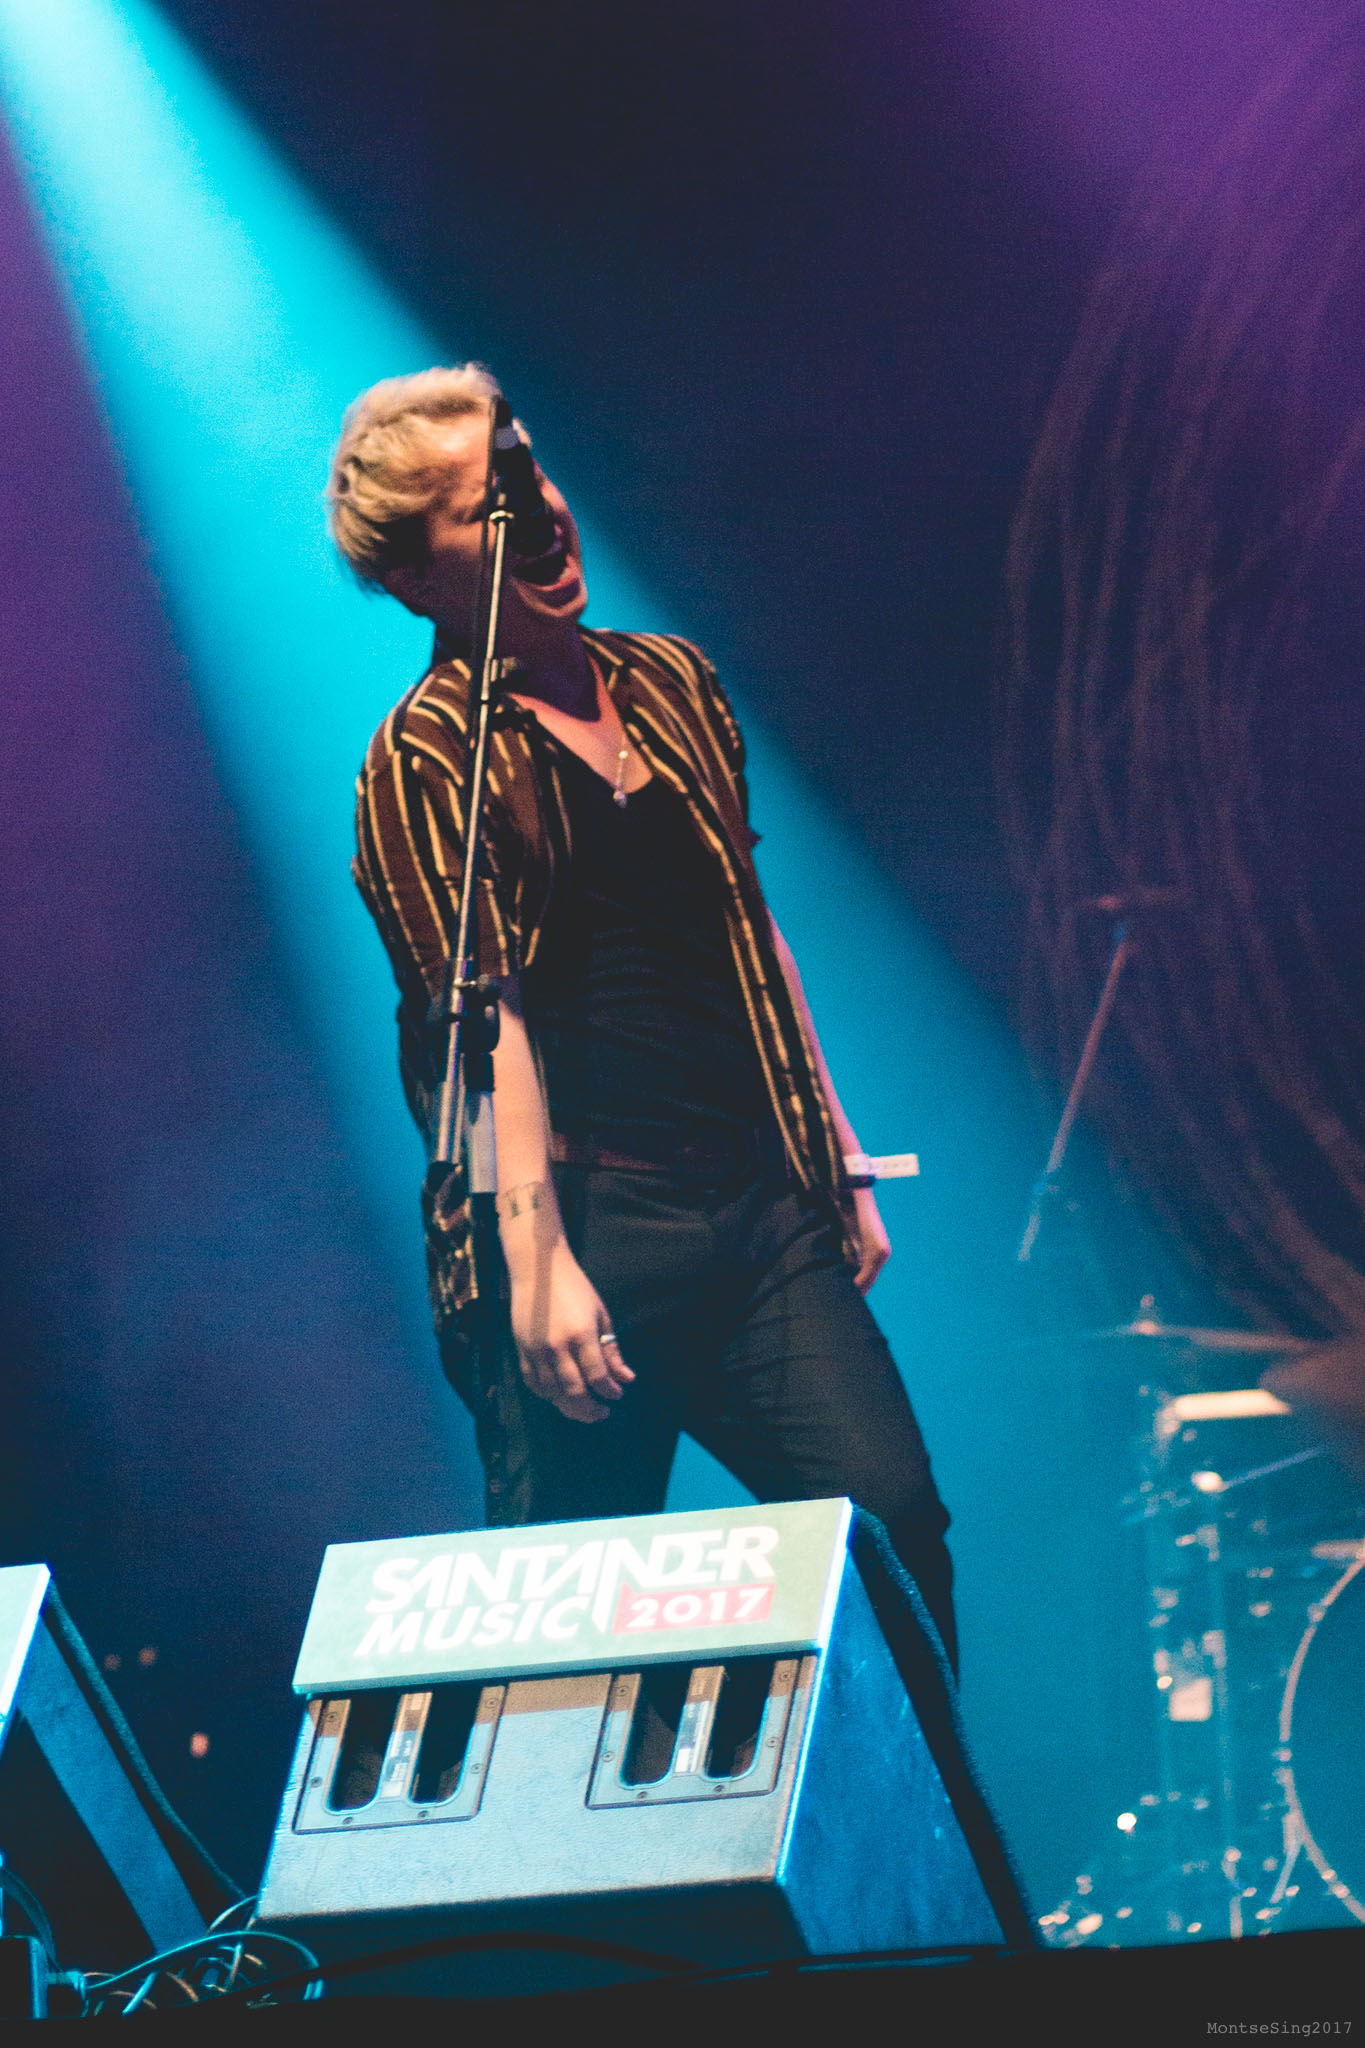 Conor de Nothing But Thieves | Foto: Montse Sing